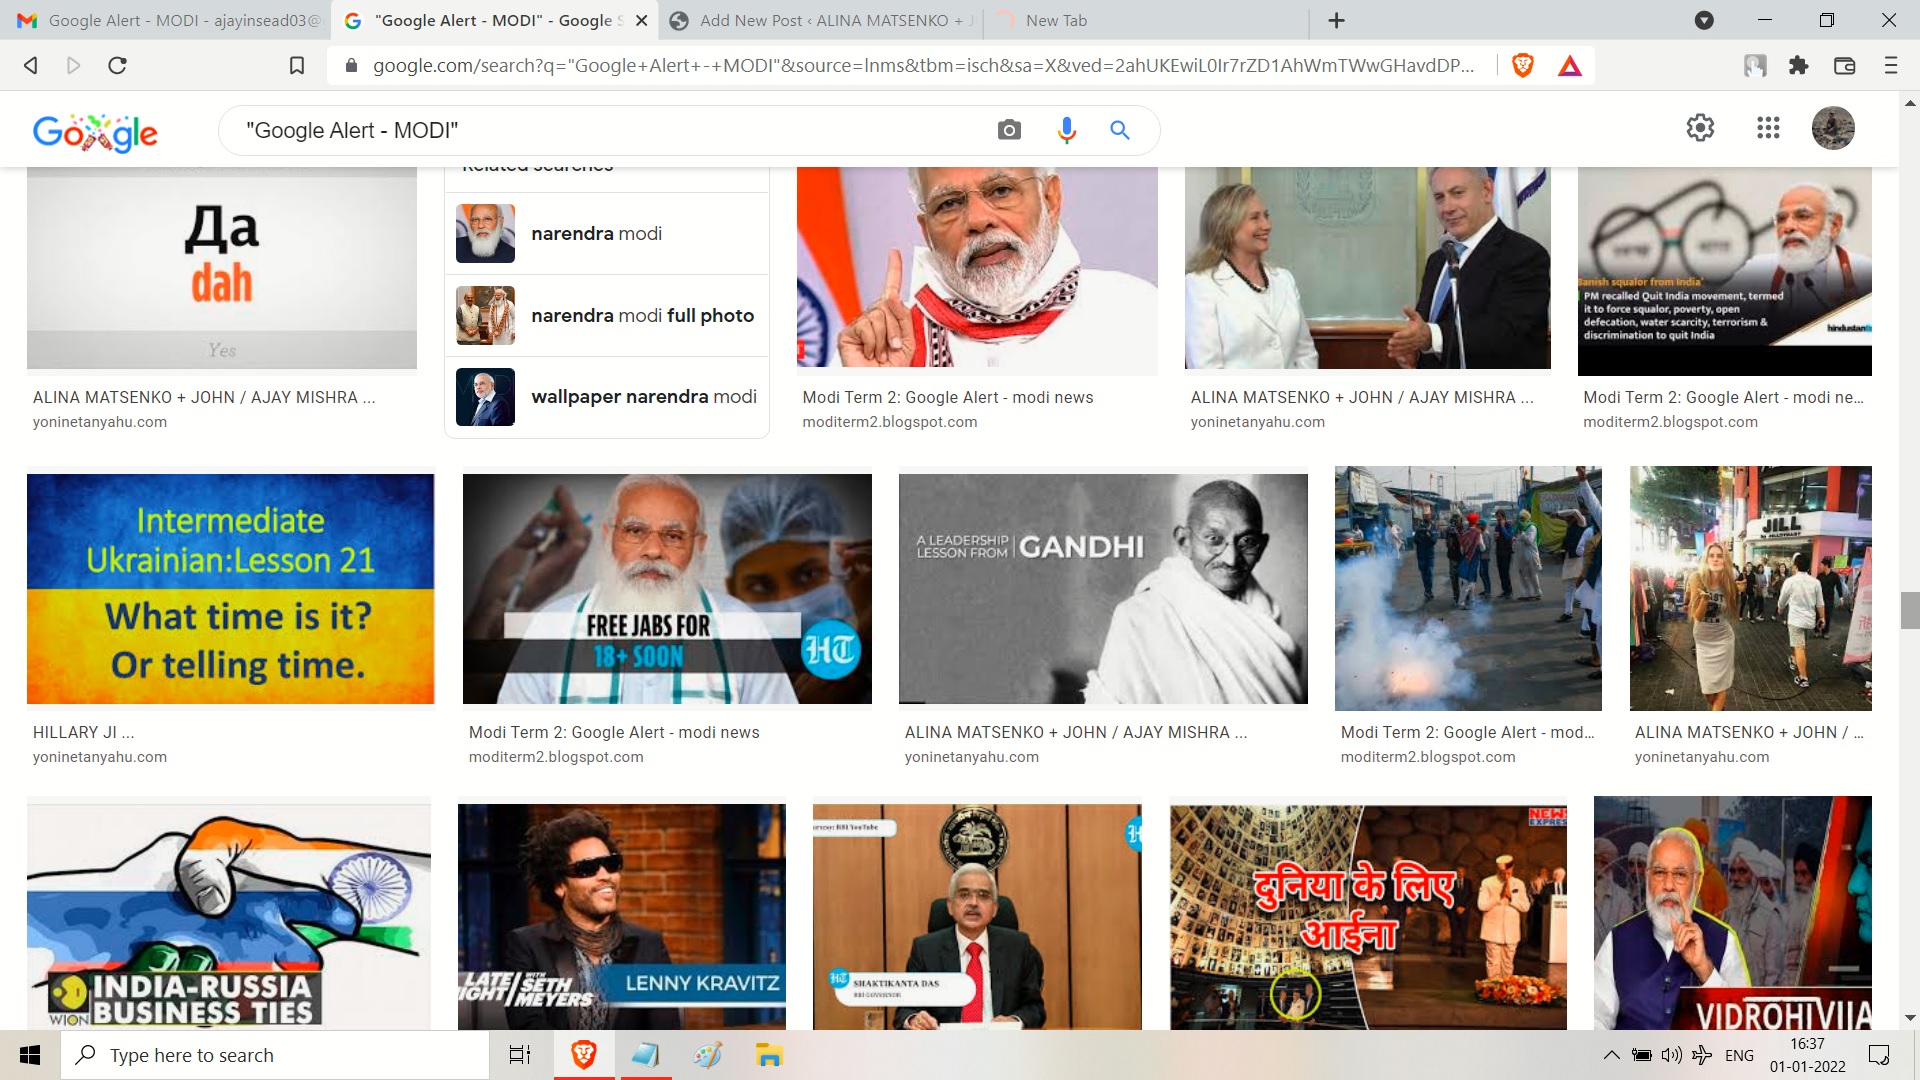 GOOGLE ALERT MODI HAPPY NEAY TYERA RAHUL GANDHI SIR AND MODI JI AND MRSSONIA GANDHI AD MSULIMS ALSO NOTJUST TO BRAHMIAND JEWS ONLY BUT END OWSIS AND KAHSN HATEED -- ..-----